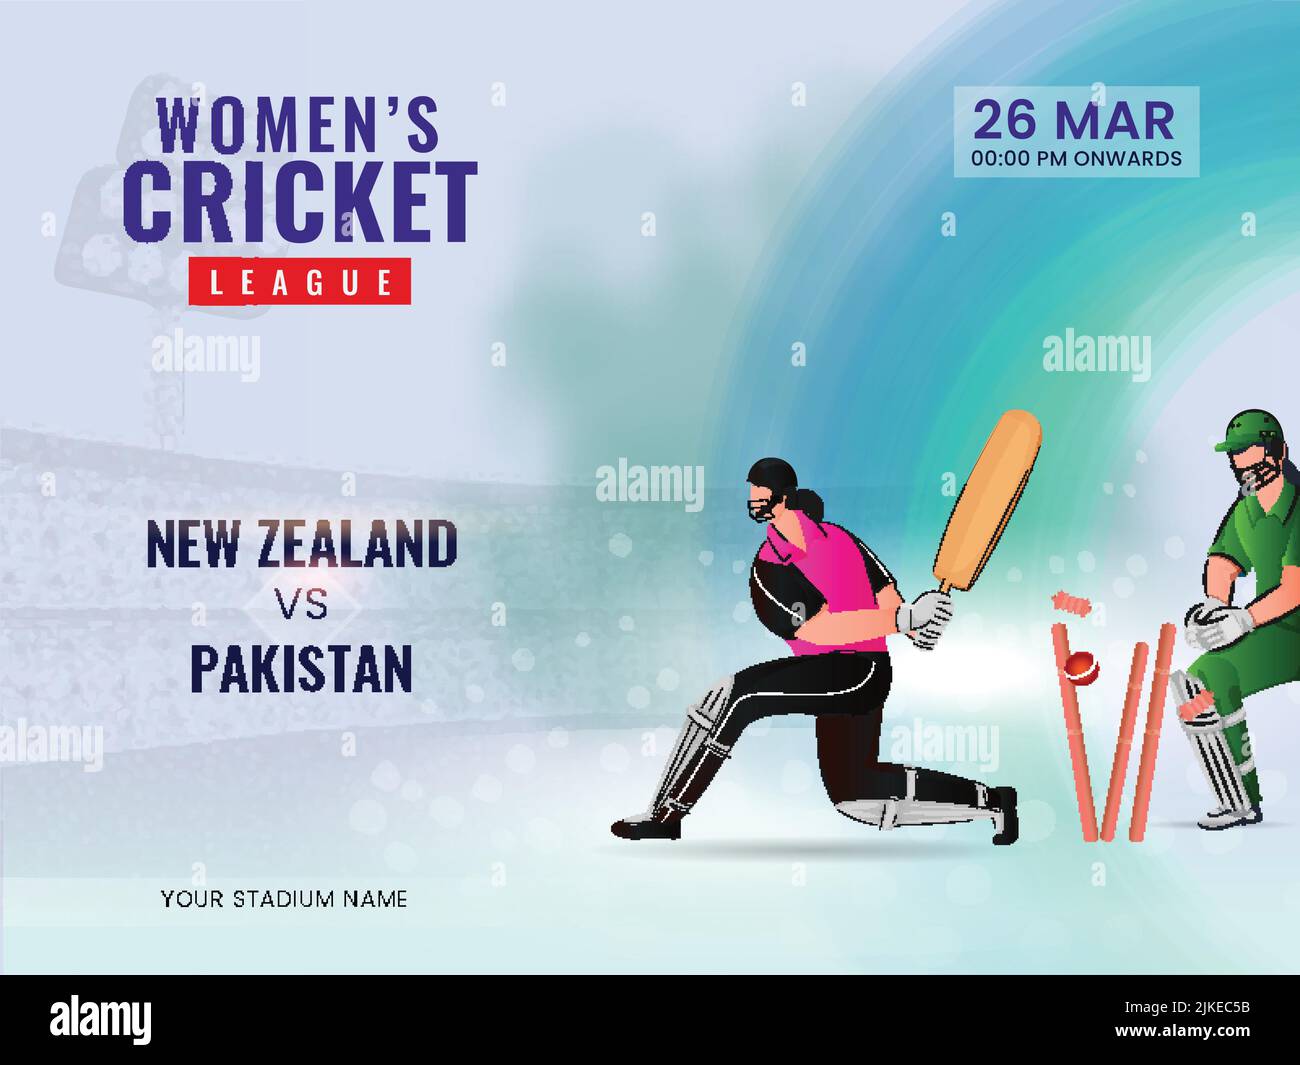 Women's Cricket Match Between New Zealand VS Pakistan And Cricketer Players In Action Pose. Stock Vector